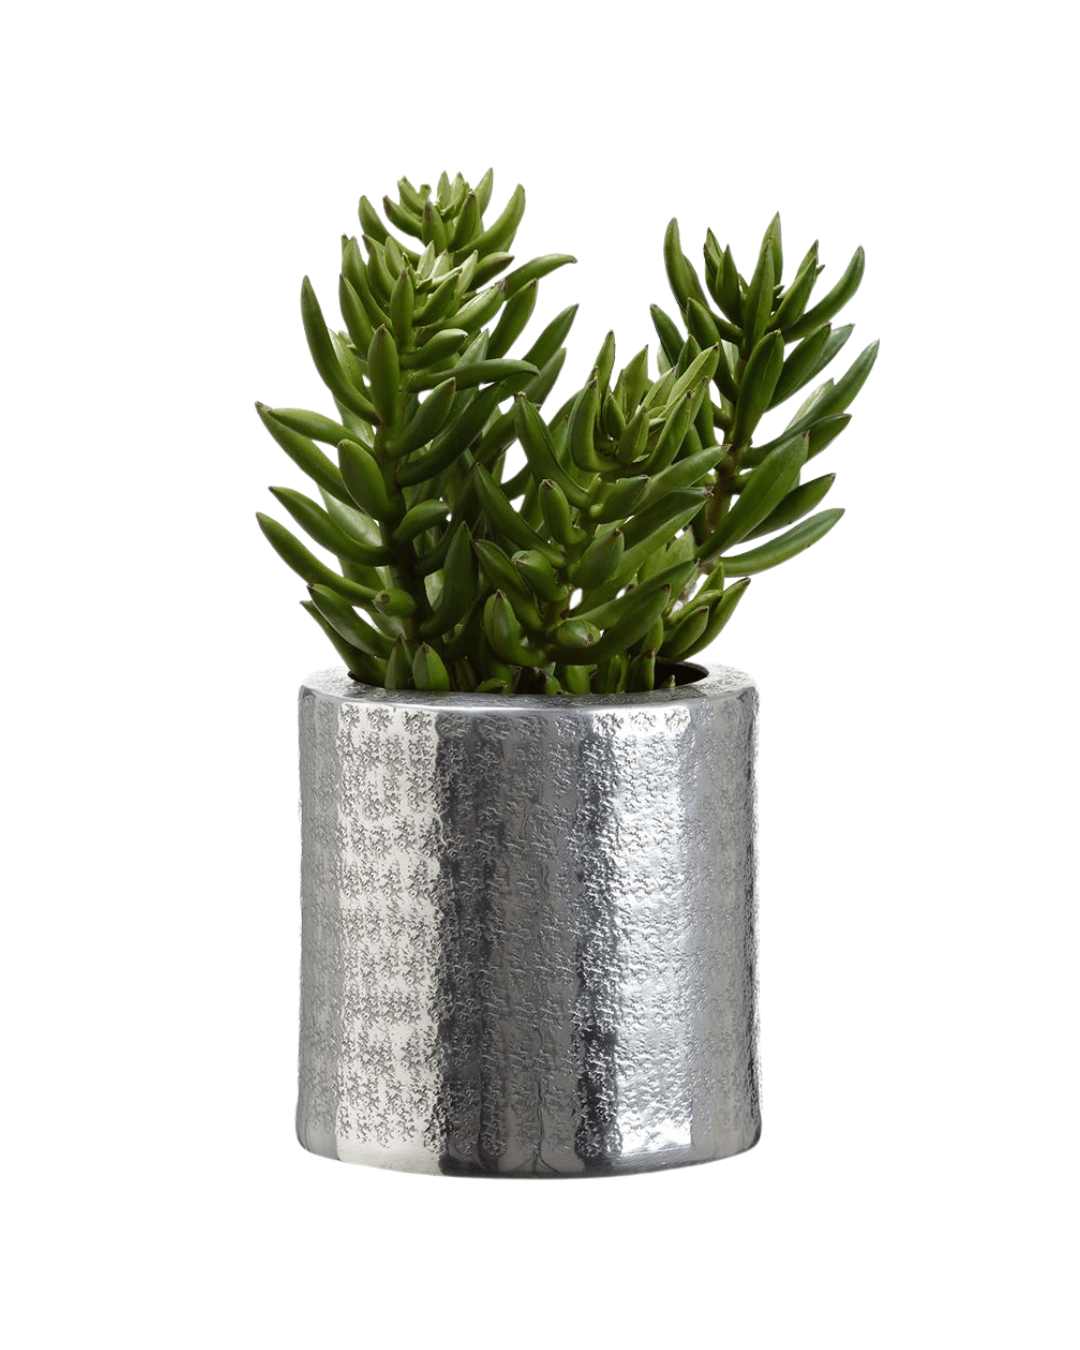 A 10.5" Senecio in Aluminum Pot with fleshy green leaves growing in a shiny metallic silver pot against a white background in a Scottsdale, Arizona bungalow by AllState Floral And Craft.